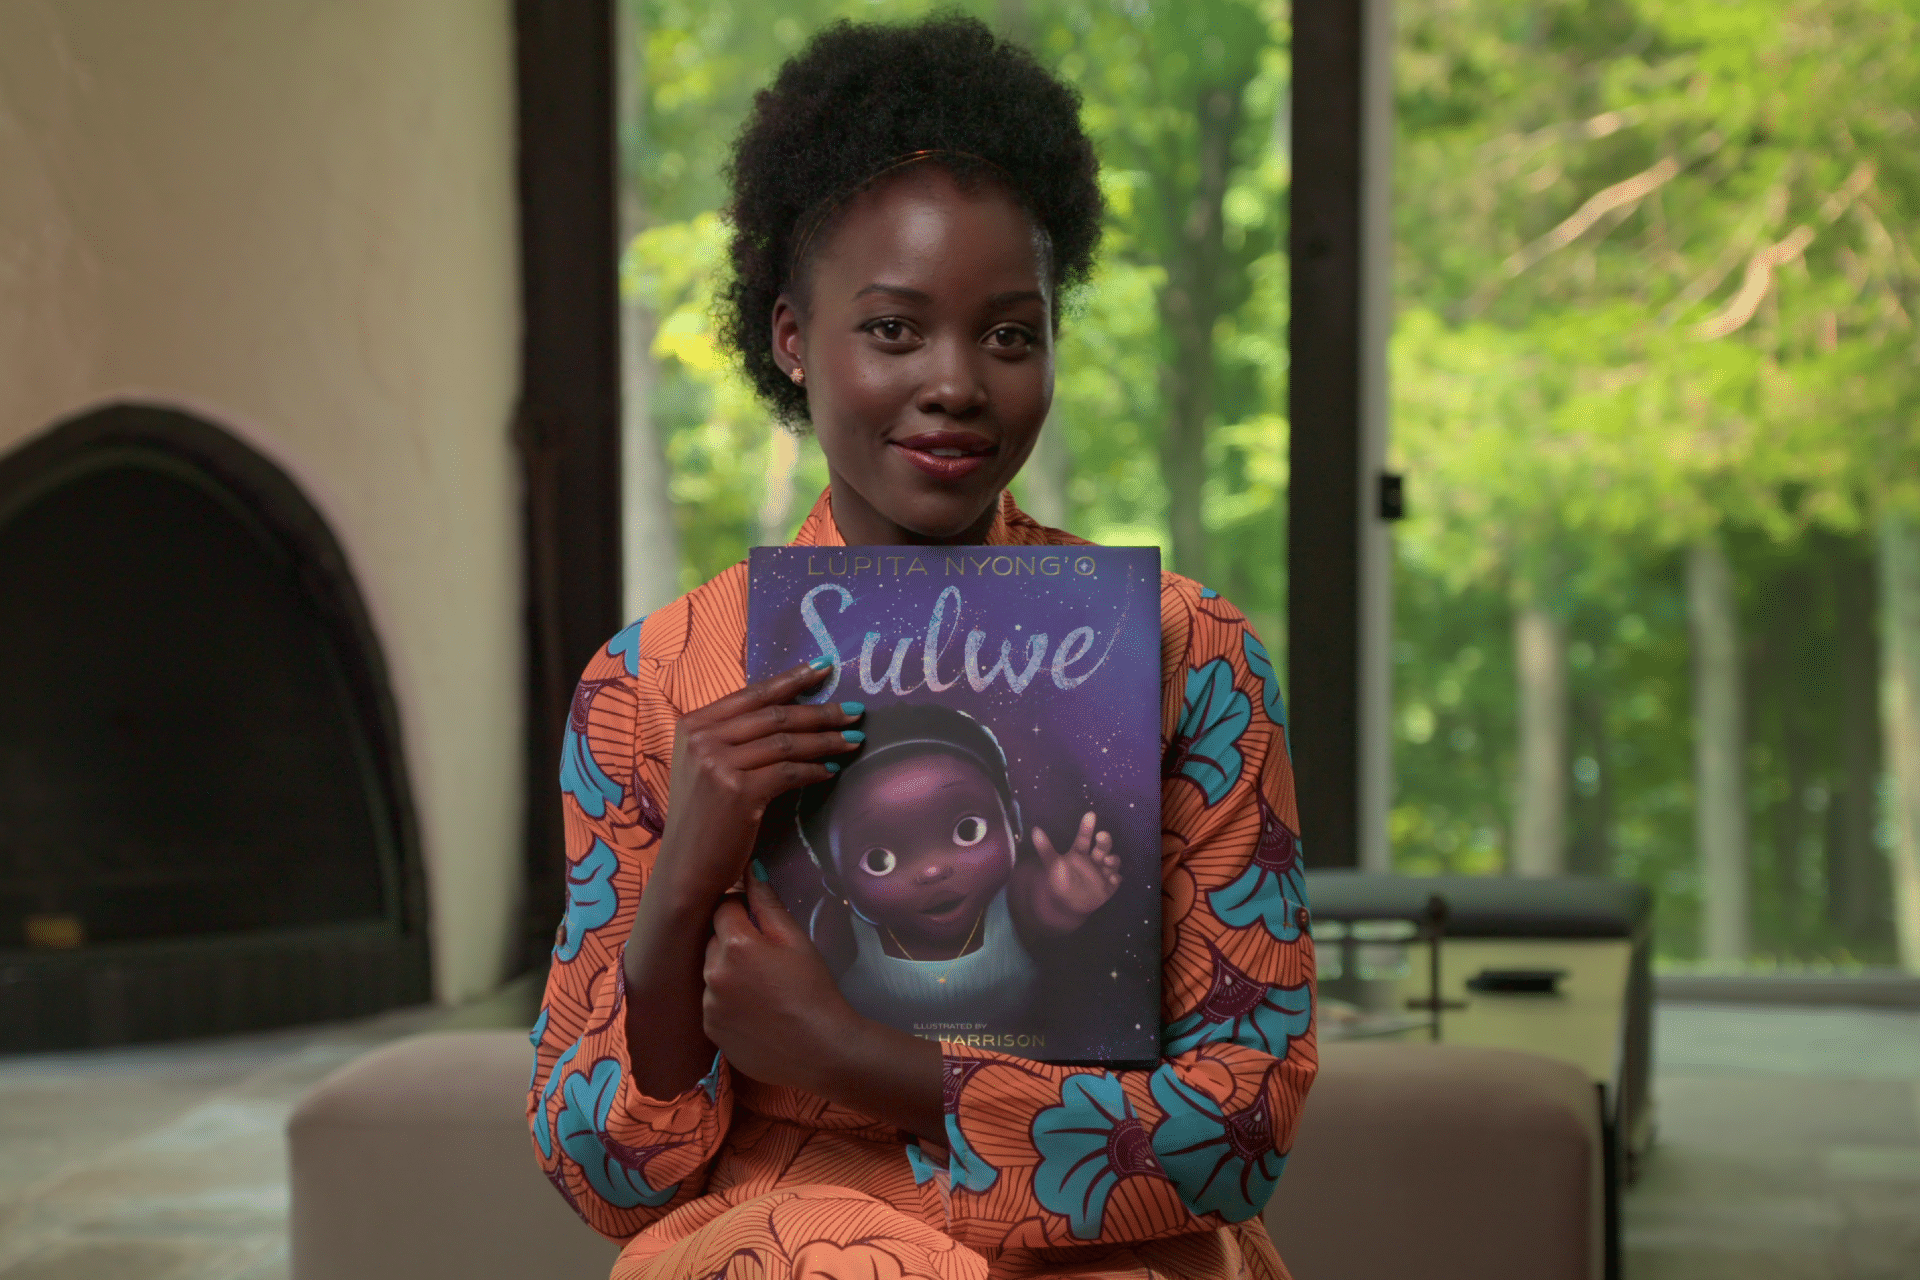 lupita holds up a children's book that she wrote